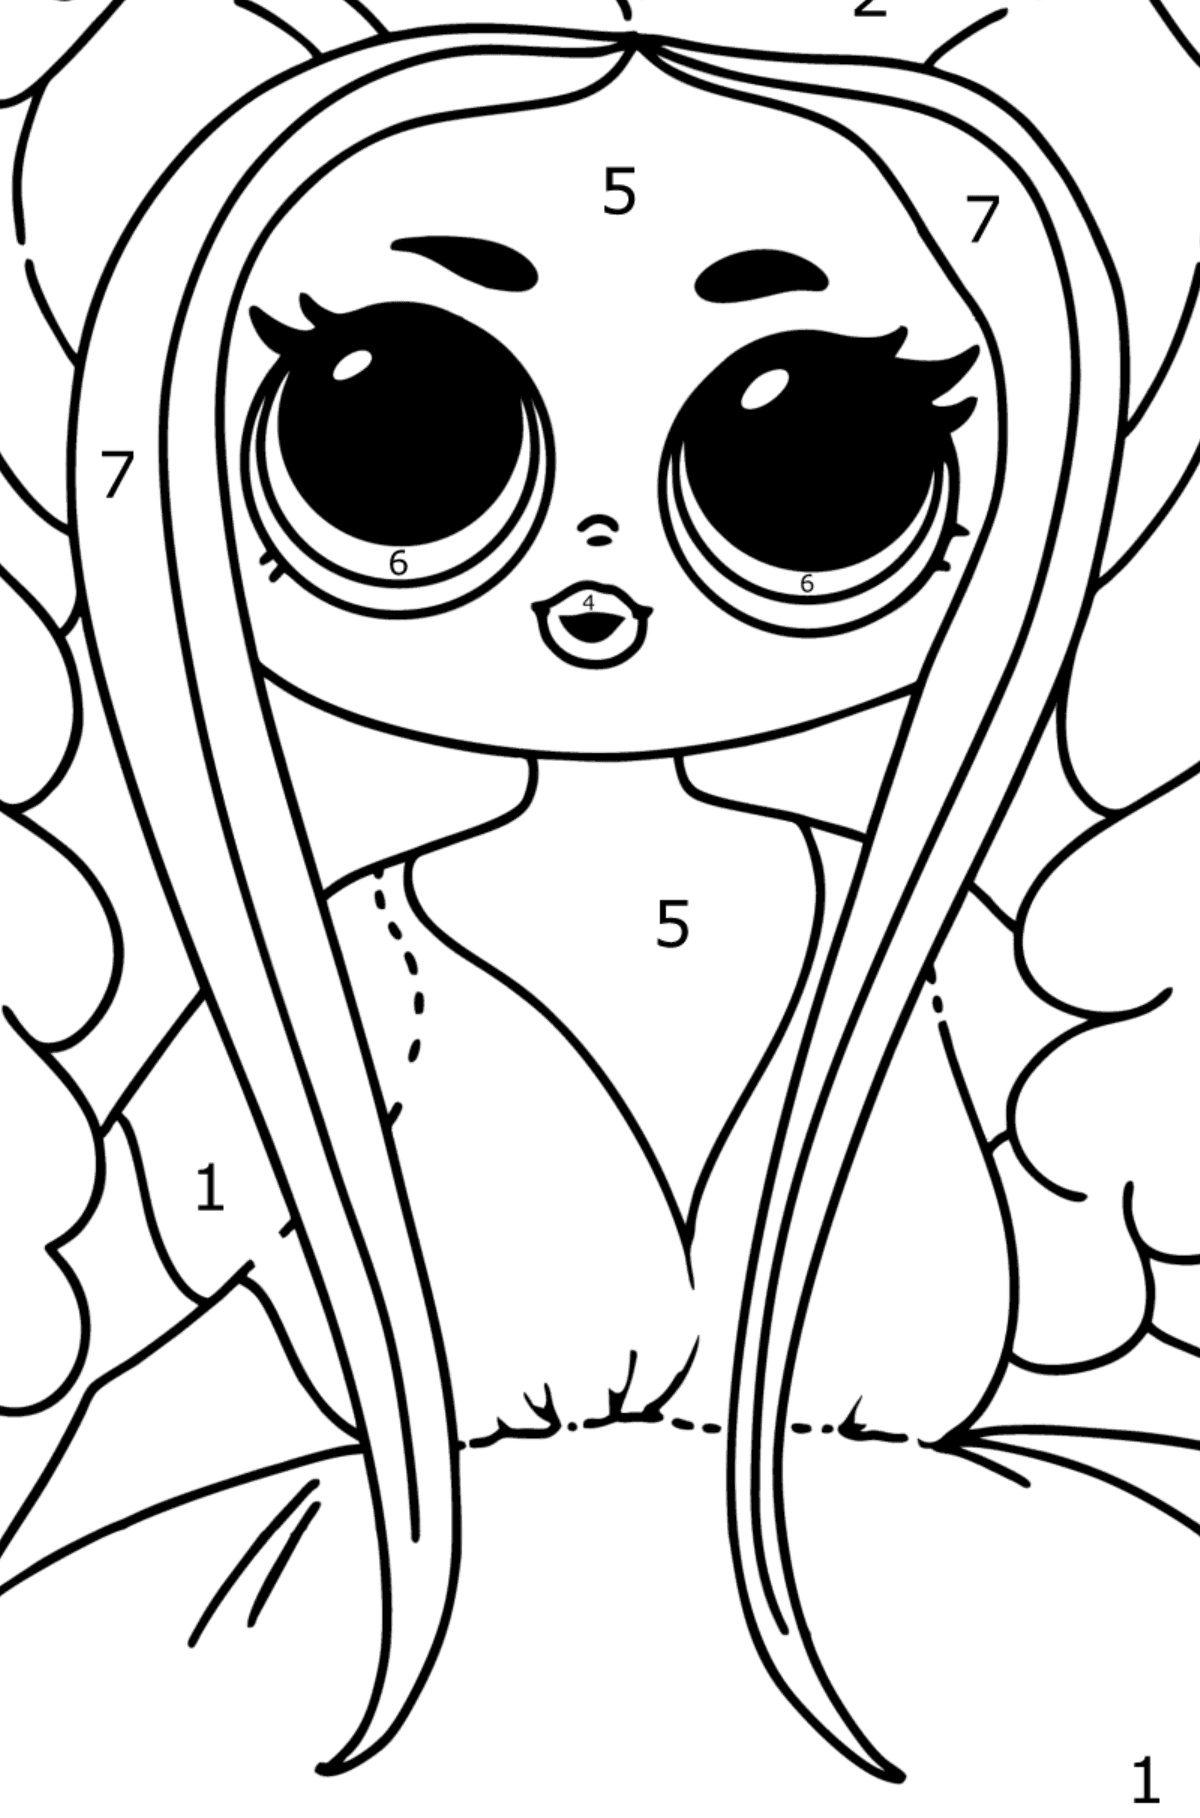 Coloring page LOL OMG Honeylicious Doll - Coloring by Numbers for Kids